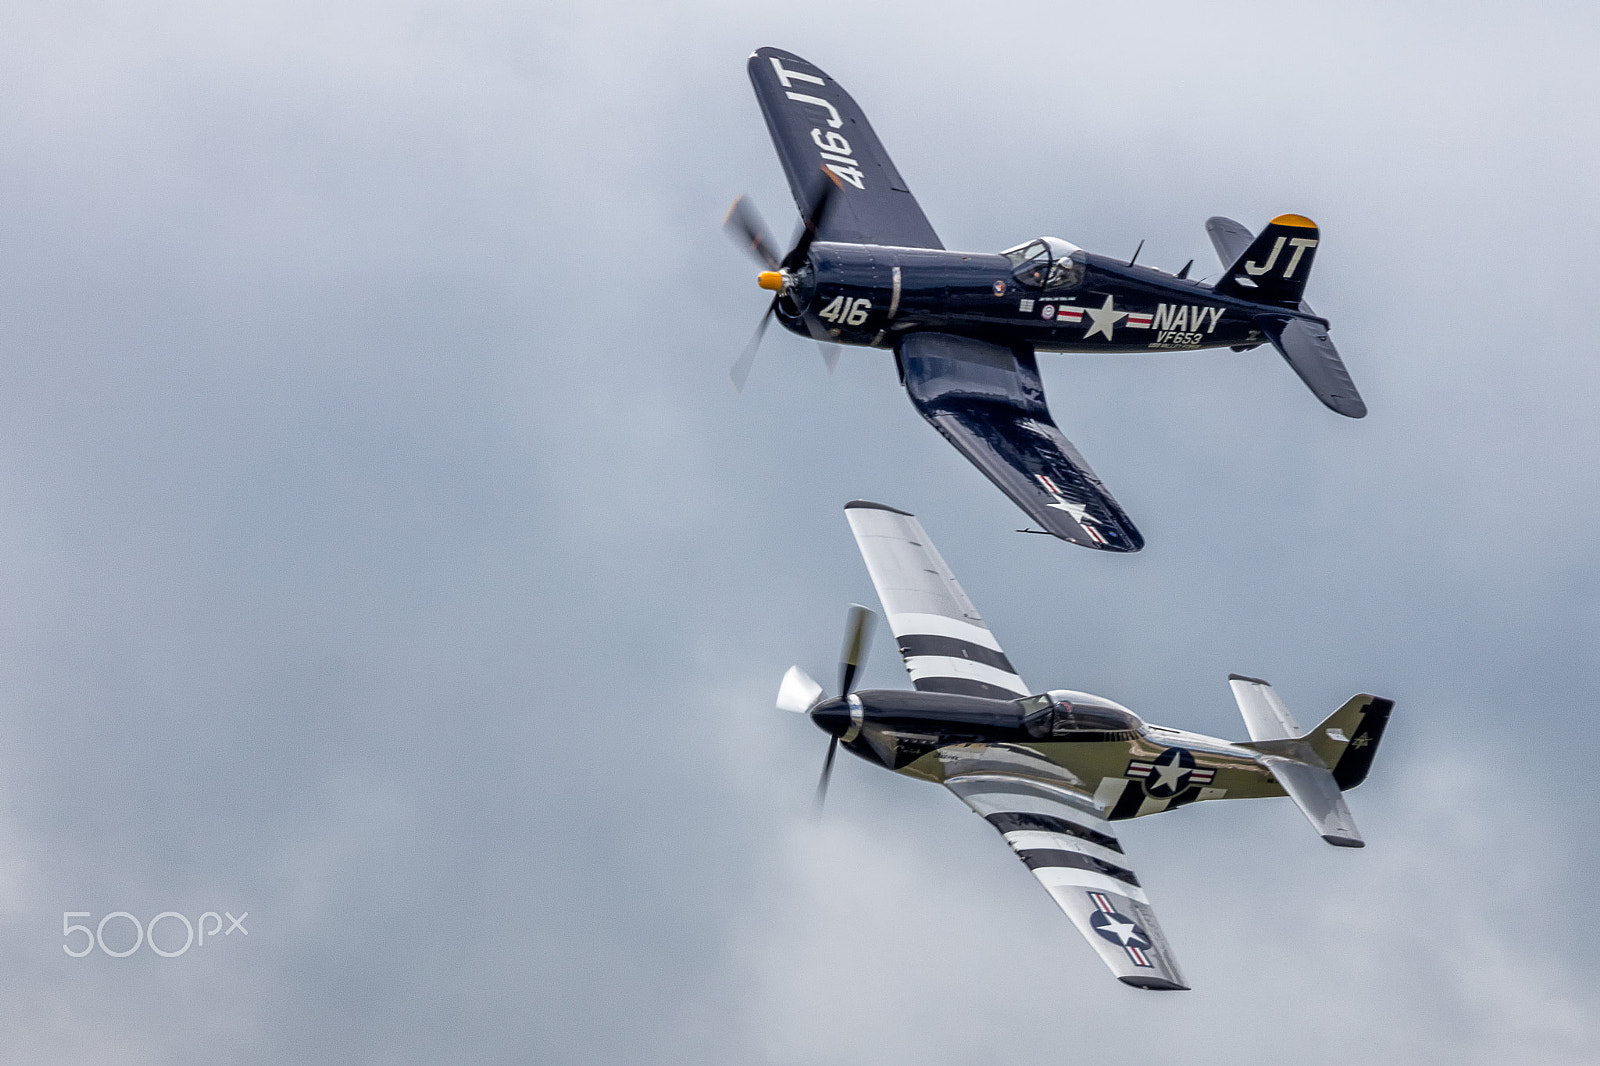 Canon EOS 5DS sample photo. F-4u corsair and p-51 mustang in flight 4 photography